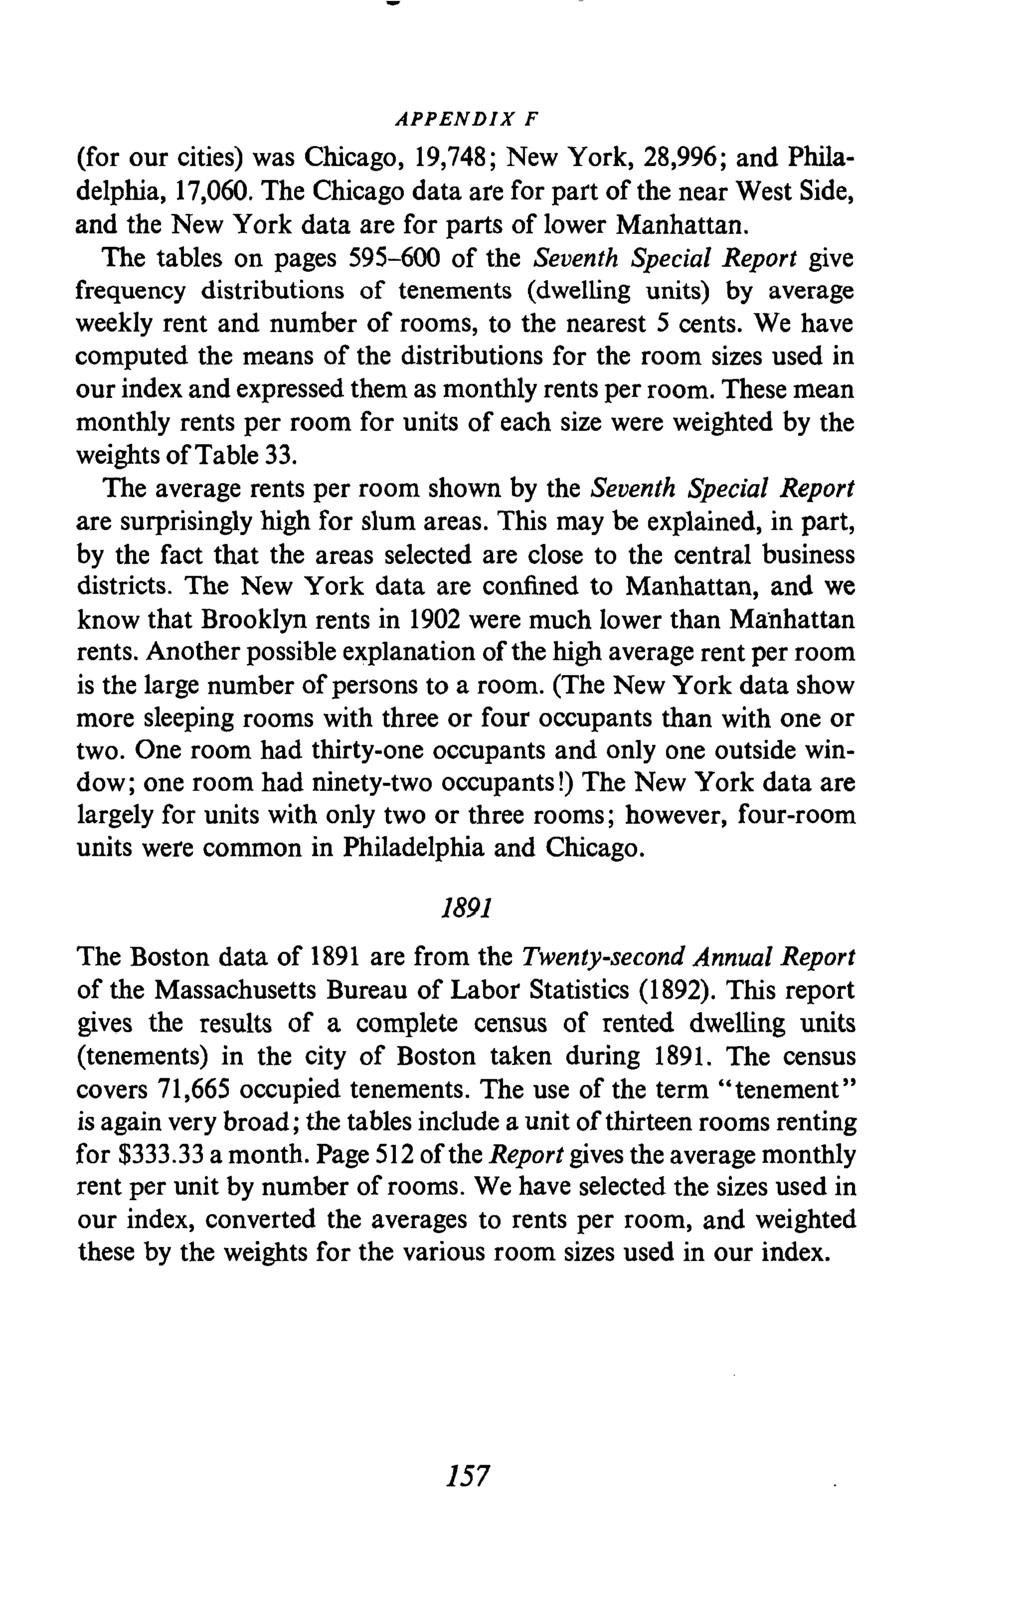 w APPENDIX F (for our cities) was Chicago, 19,748; New York, 28,996; and Philadelphia, 17,060.